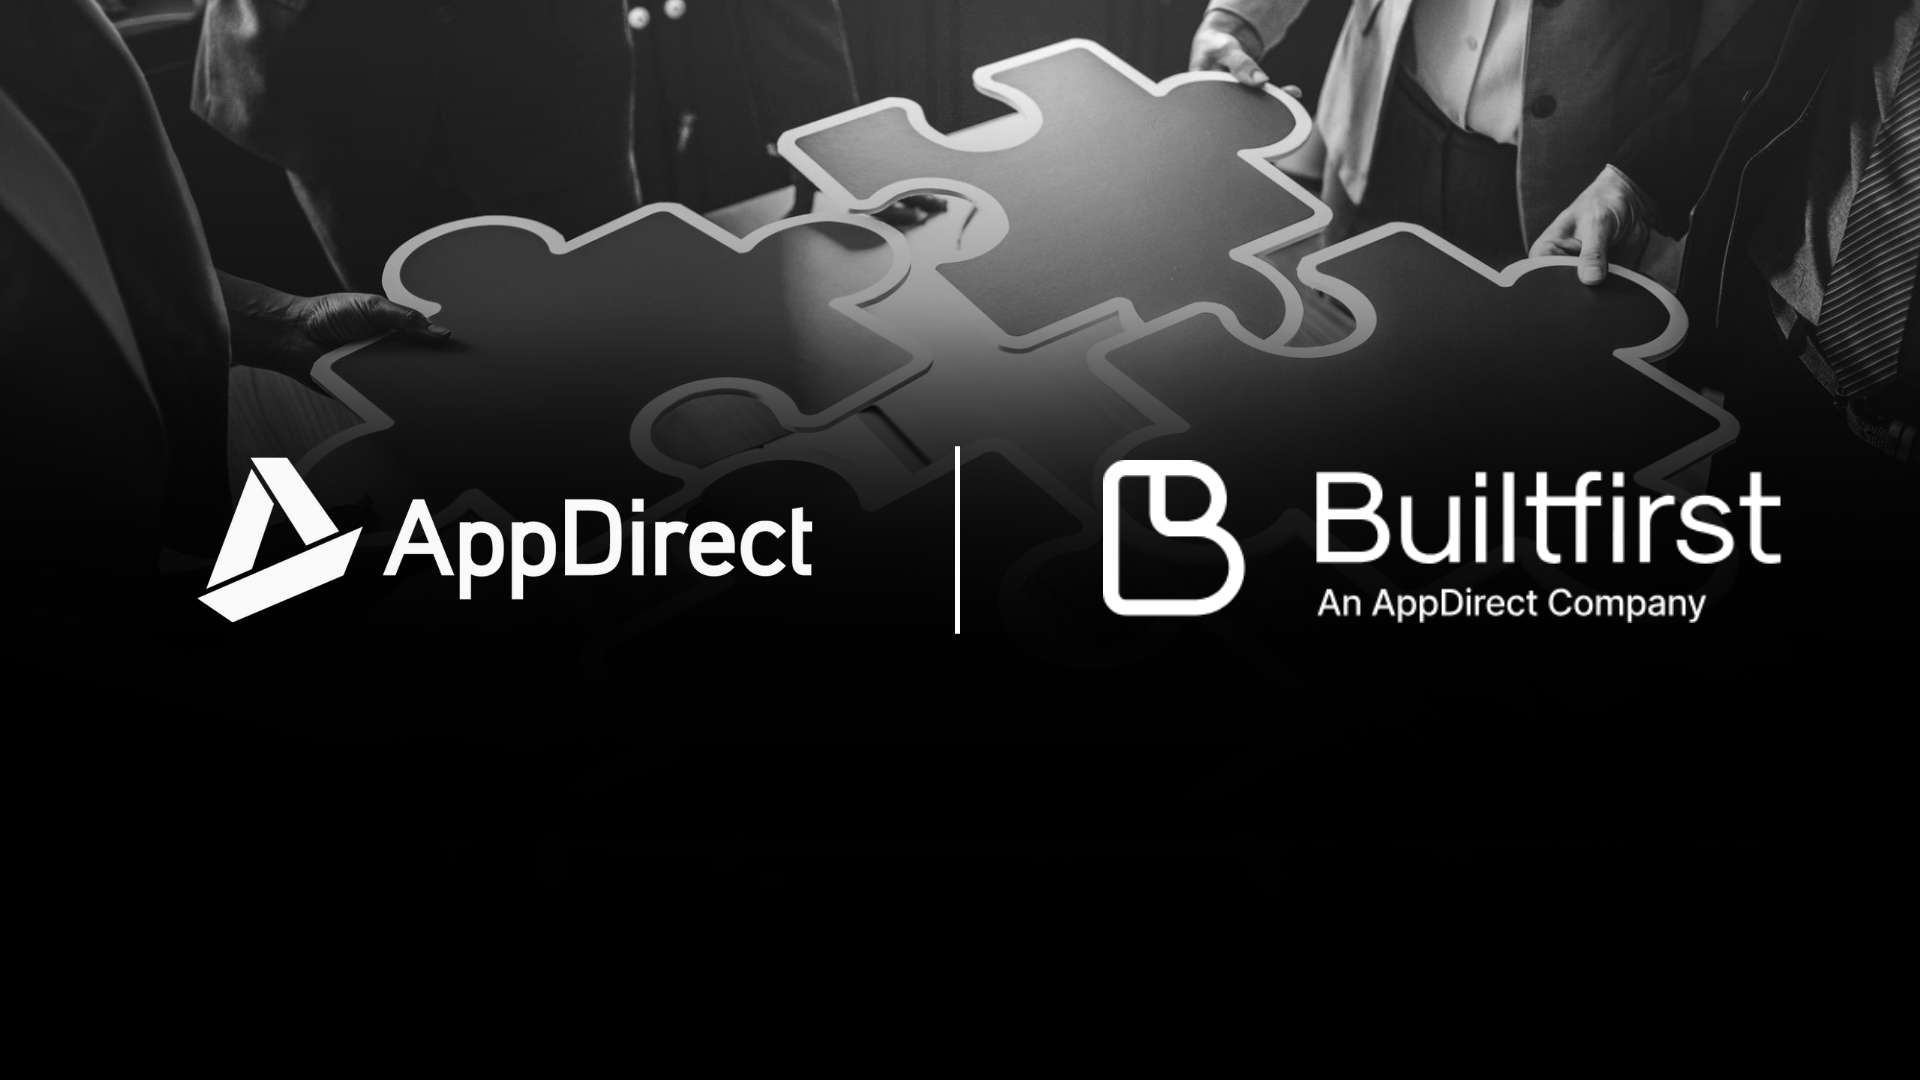 AppDirect Acquires Builtfirst Expanding Marketplace Solutions for B2B Commerce